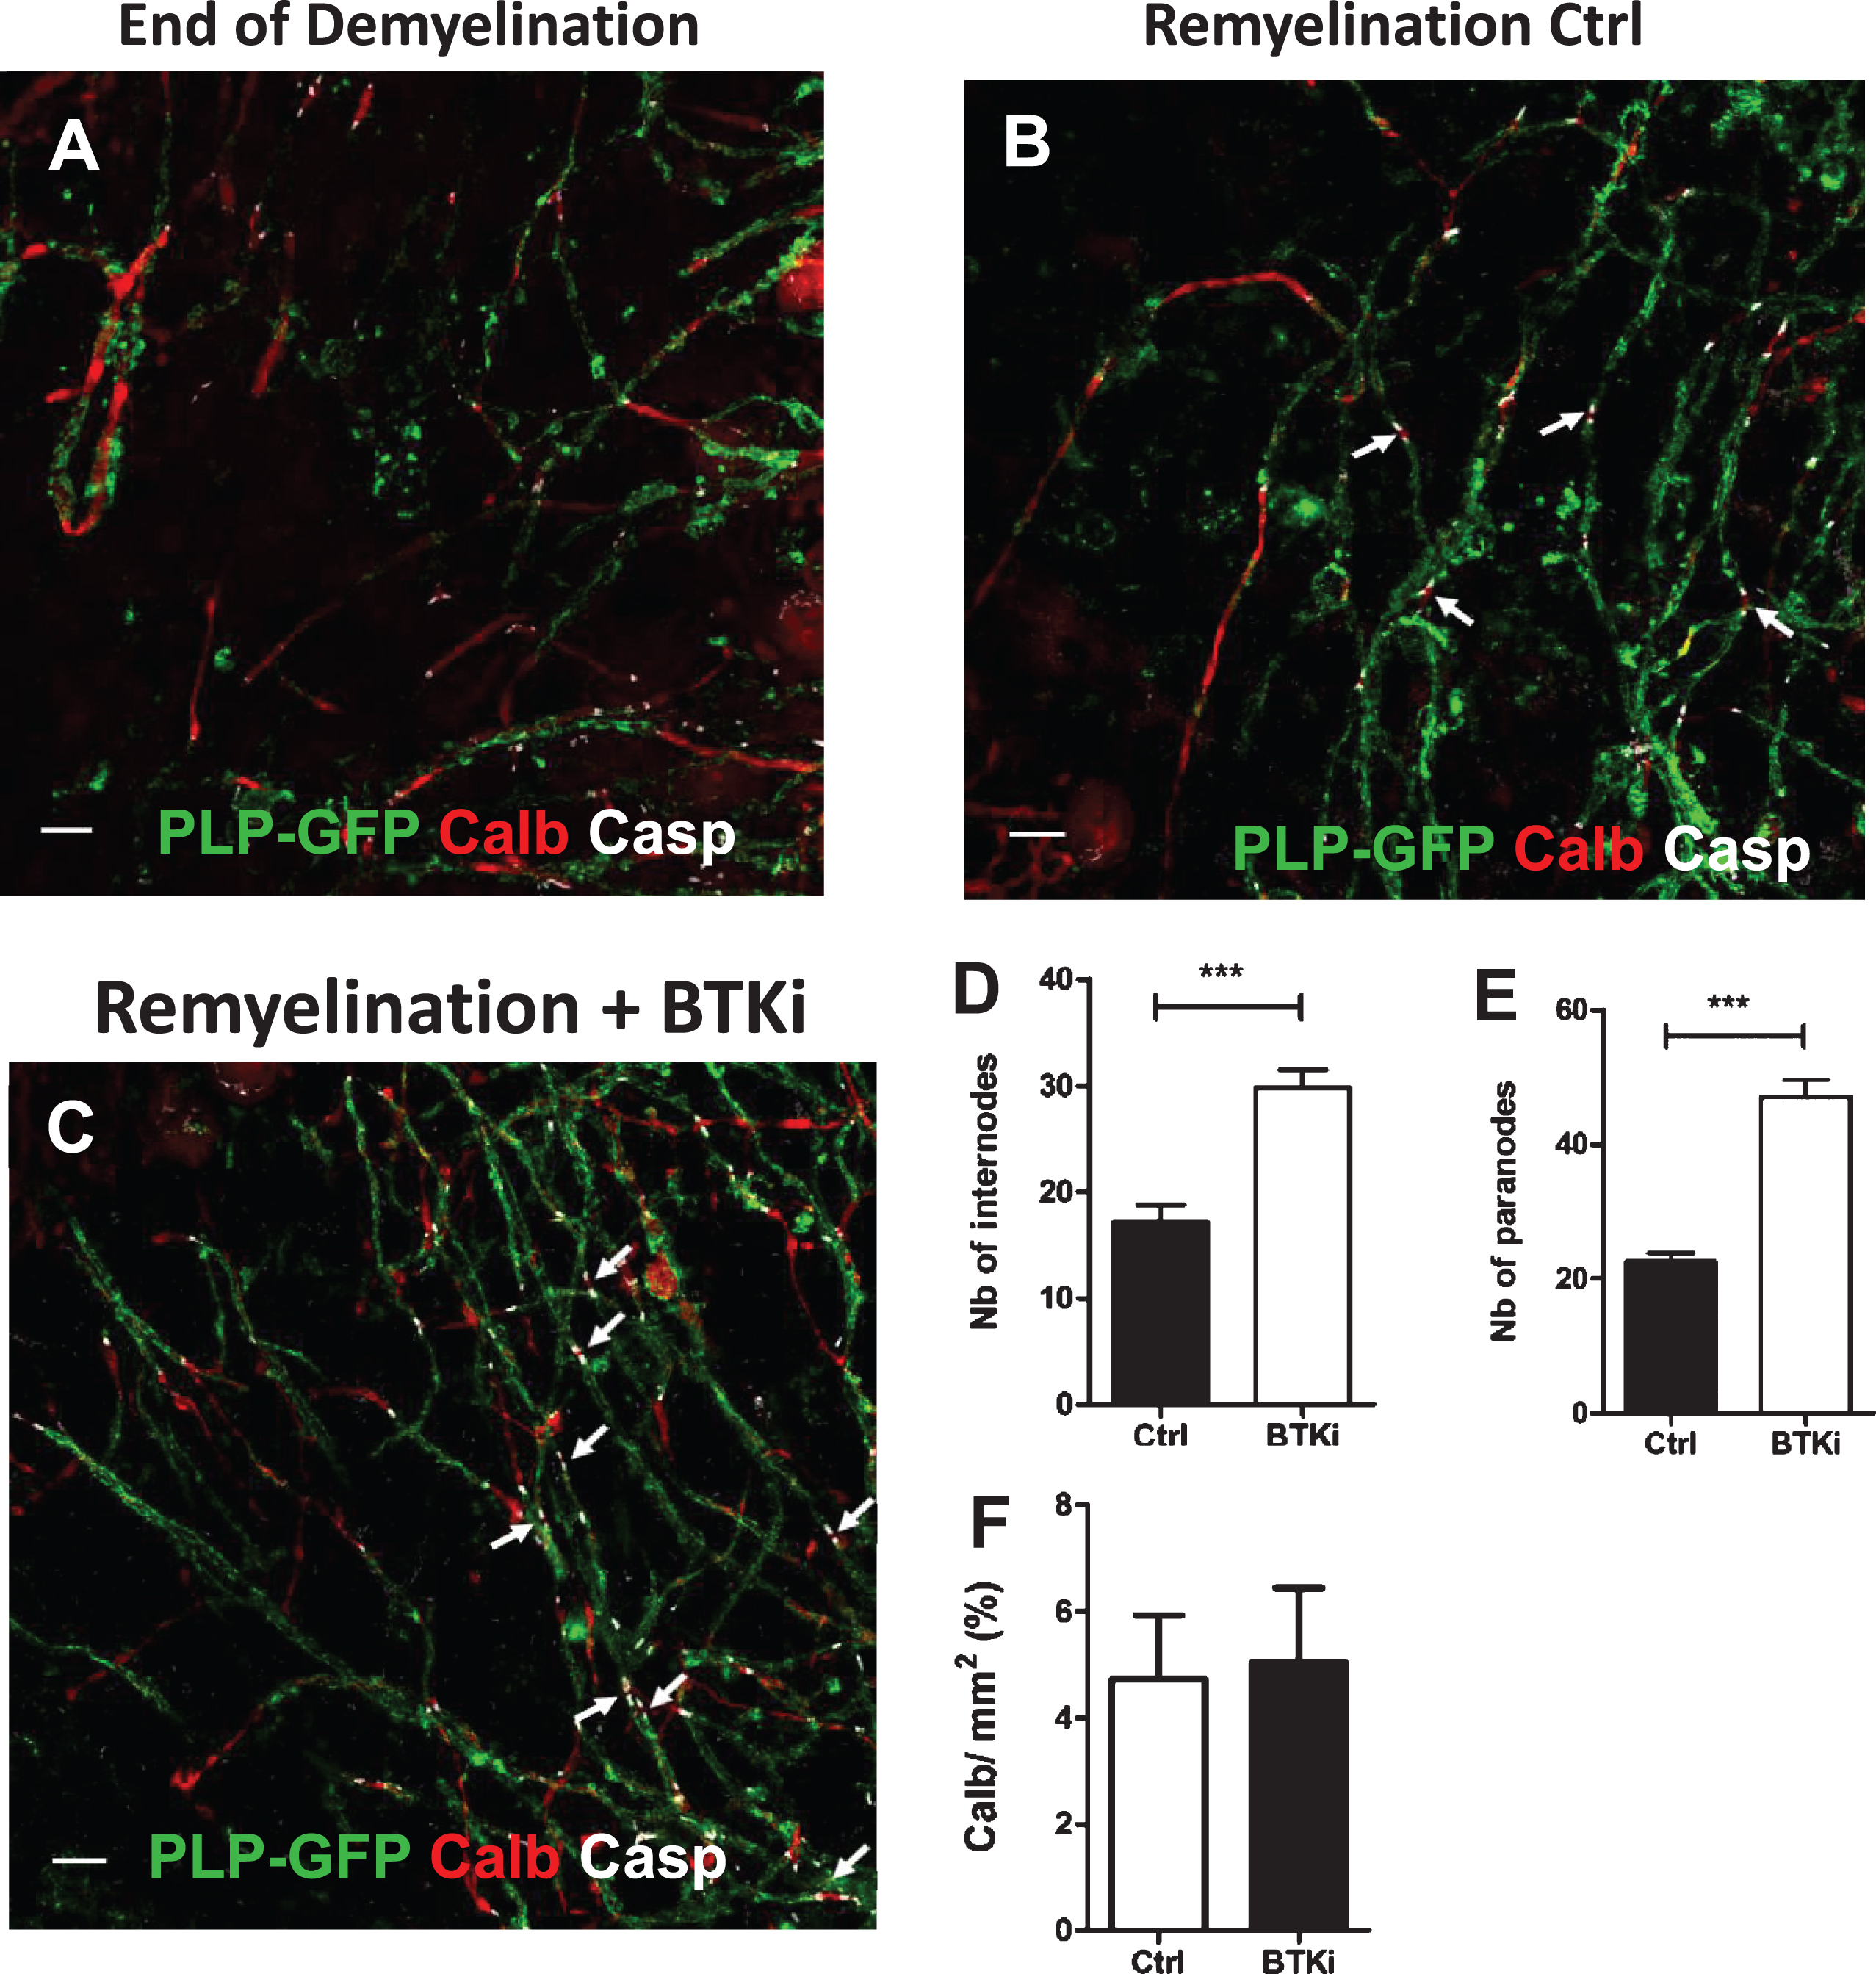 Inhibition of BTK favors remyelination. A–C: Cerebellar organotypic slices from P9 mouse, were exposed to LPC at DIV6 for 16–17 h. At DIV 9, i.e., peak of demyelination, myelinated internodes were no longer observed and only PLP + myelin debris were detected A). At the end of LPC-induced demyelination, cultures were treated with BTKi (BTKi-1) (1 μM) from DIV 9 before triple labeling with anti-PLP (myelinated internodes, green), anti-Caspr (paranodes, white) and anti-Calbindin (axons, red) antibodies. Small white arrows in control (Remyelinated-Ctrl B) and BTKi treated (Remyelinated-BTKi C) cultures point to some complete nodal structures with the Caspr+ paranode on each side of the Calbindin+ naked axon. D–F: Remyelination was evaluated by counting either PLP+ myelinated internodes (D) or Caspr+ paranodal structures (E) and axonal density as measured by the intensity of Calbindin labeling (F) (see M & M section for details). Scale bar = 10 μm